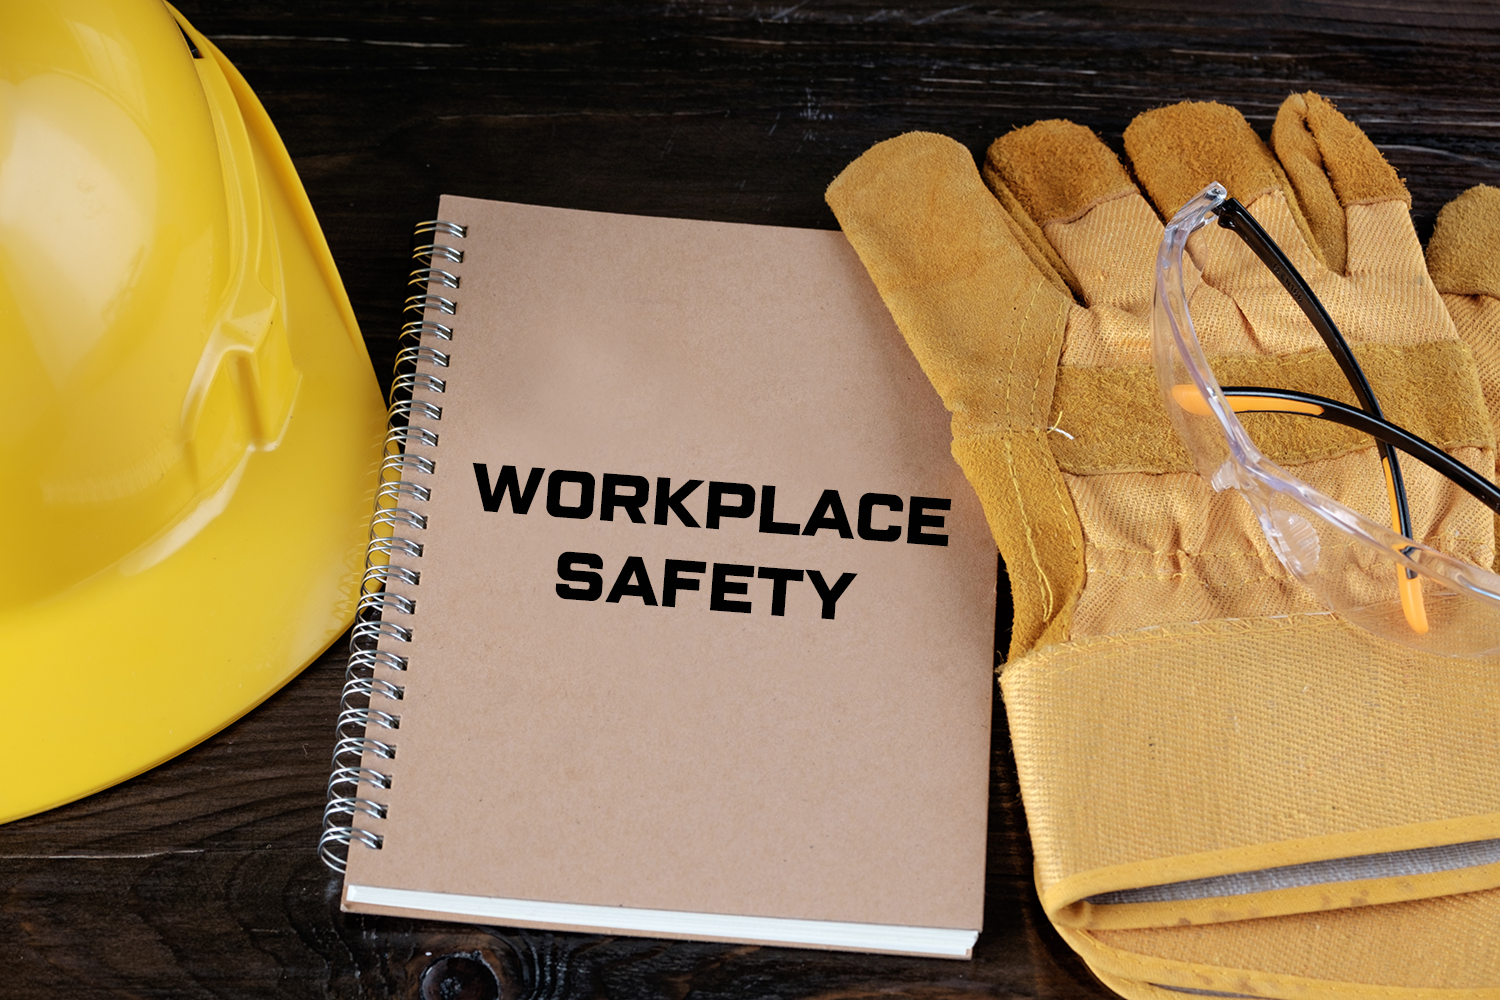 Workplace safety guidelines